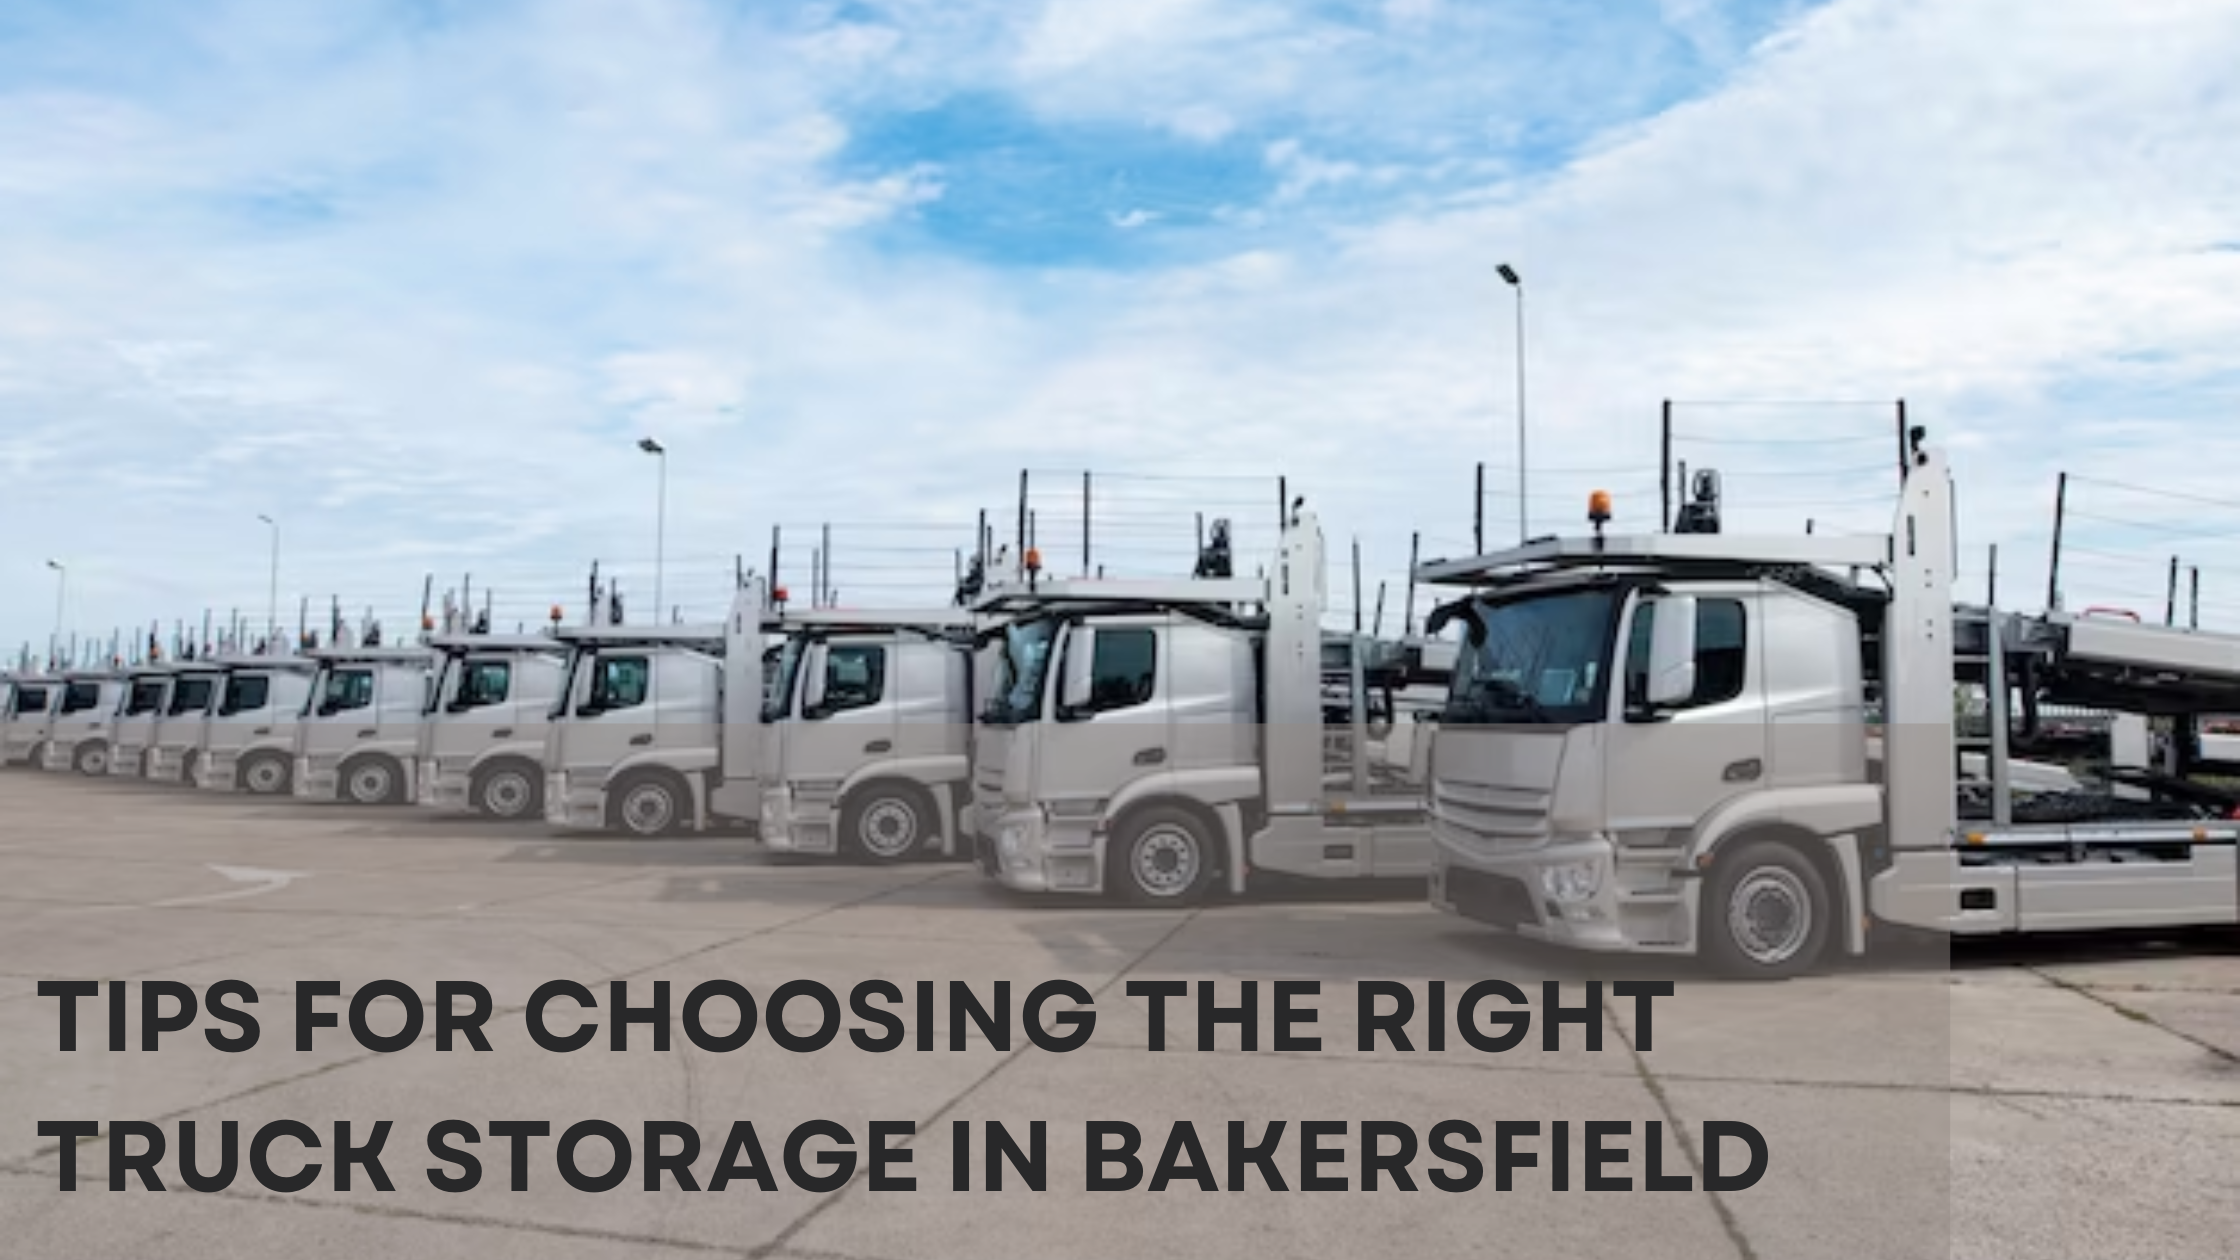 Tips for Choosing the Right Truck Storage in Bakersfield